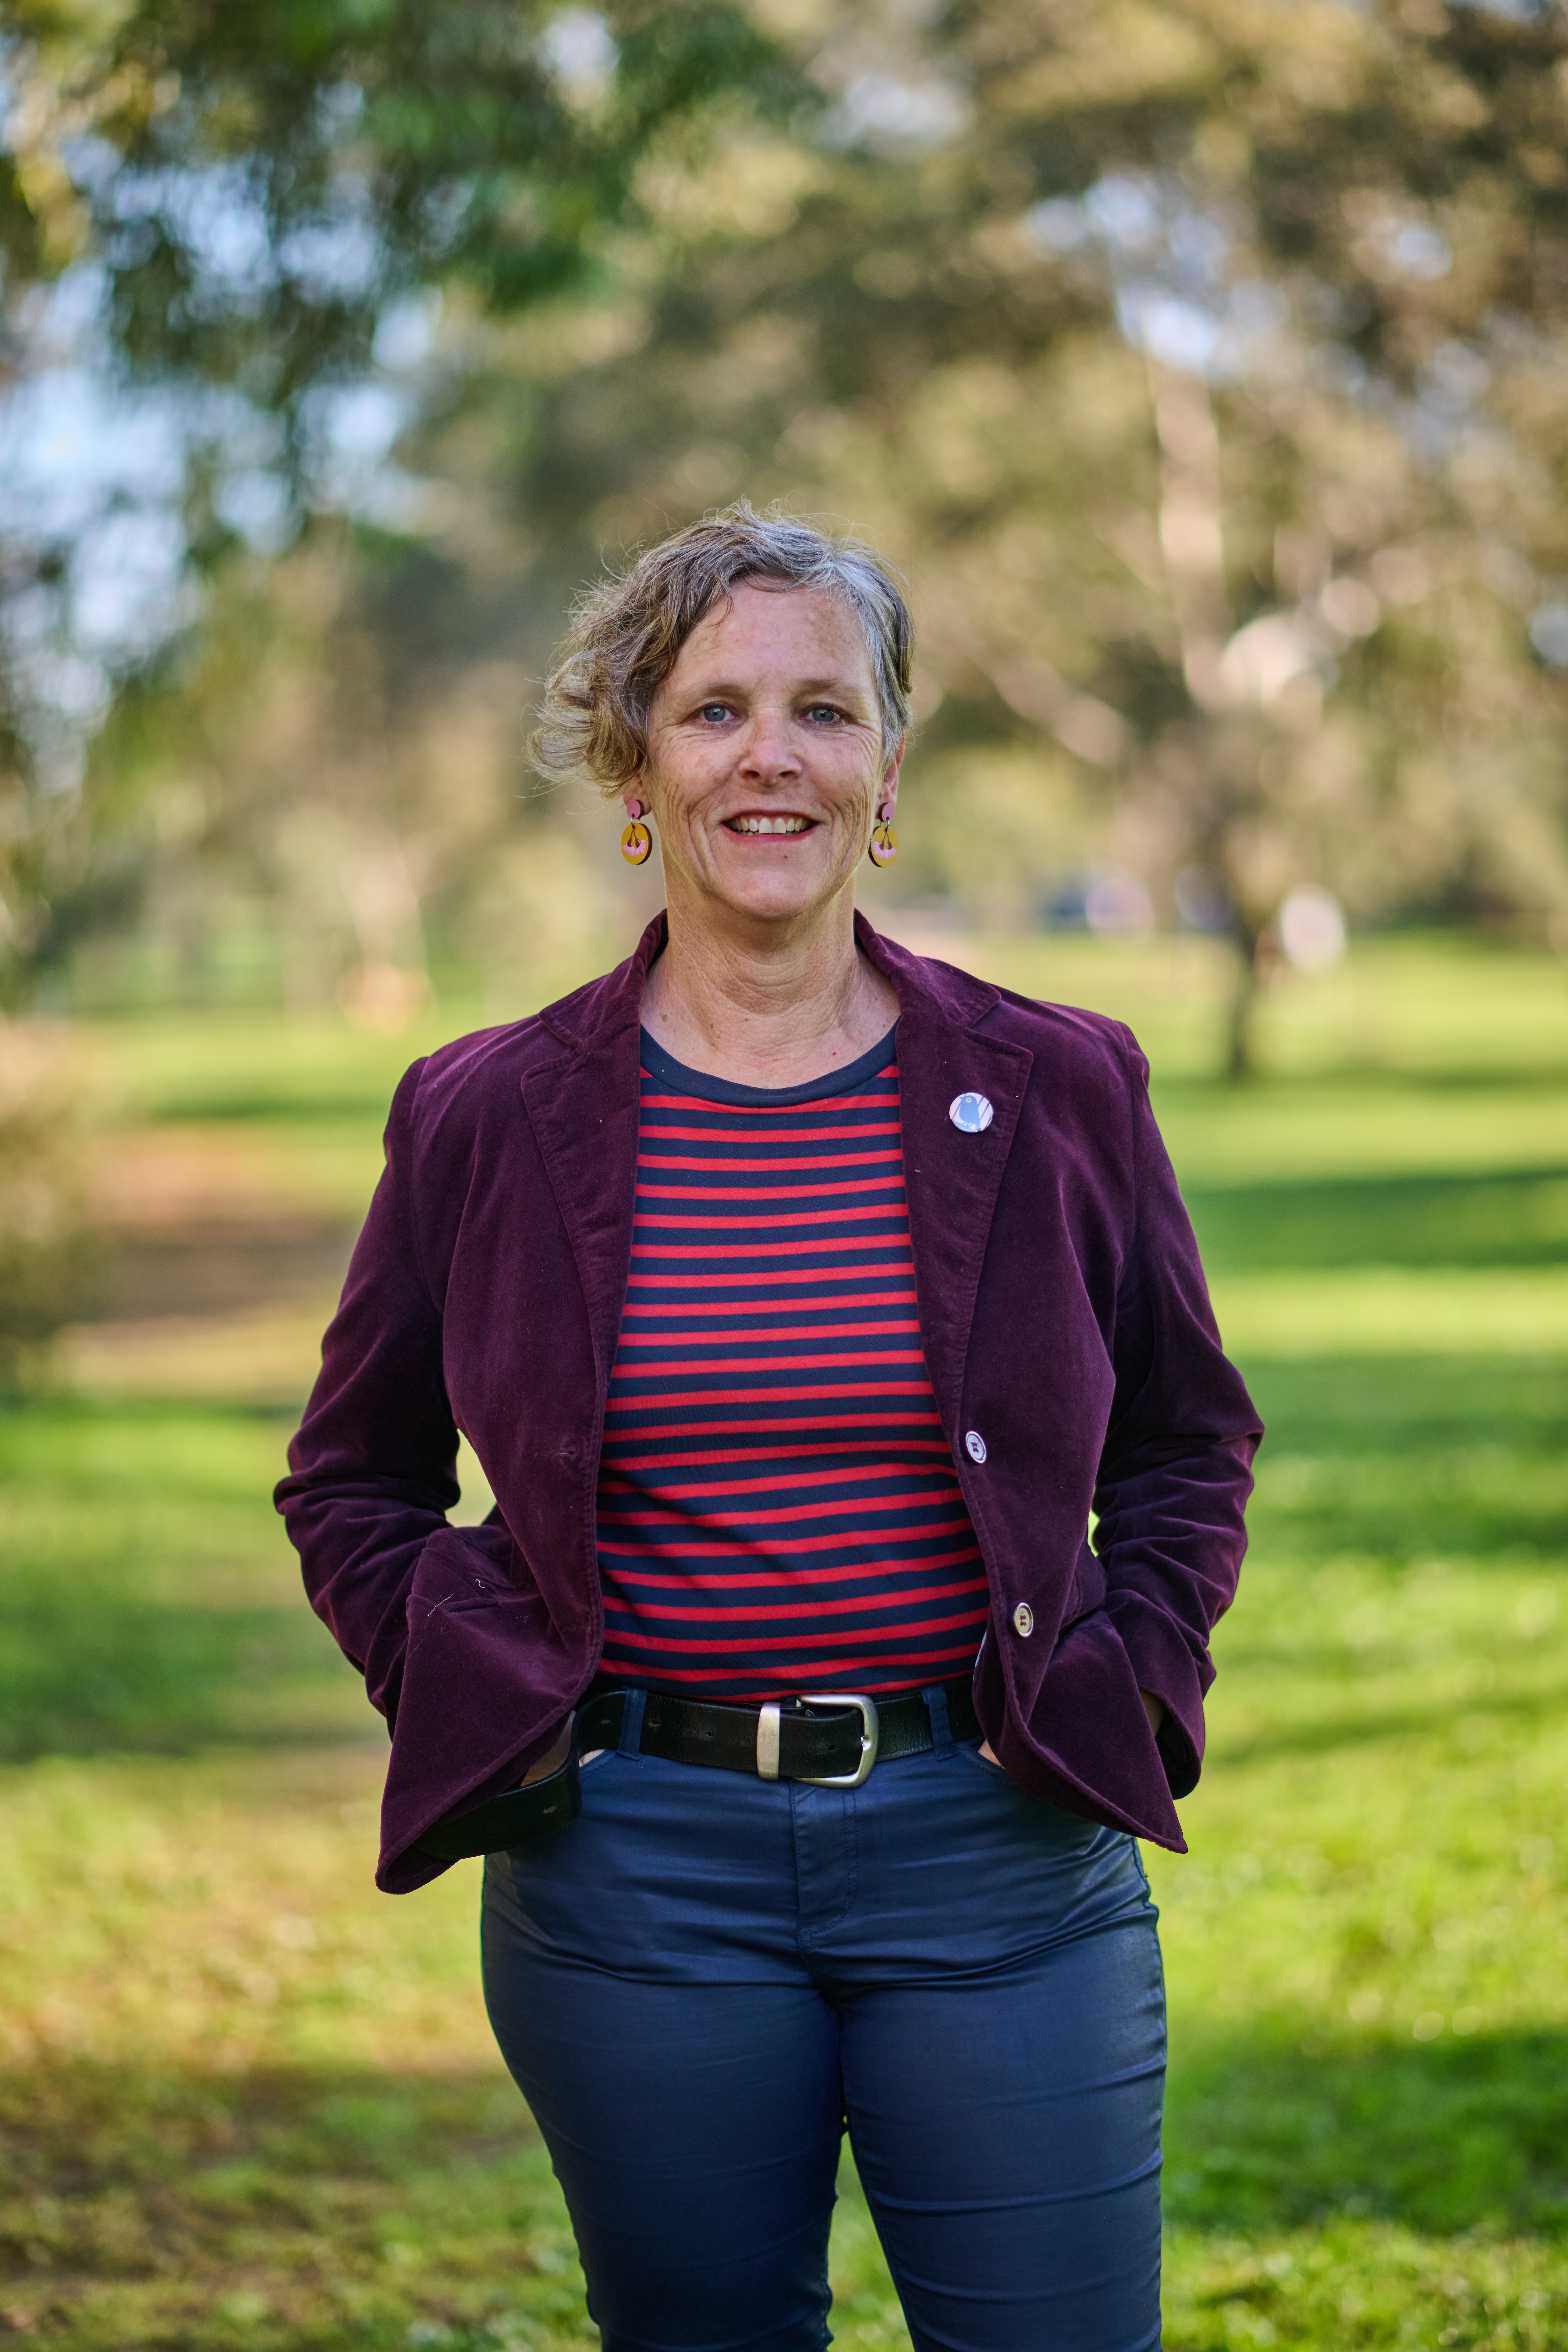 A woman with short brown hair, a purple blazer, stripy red and blue shirt and blue pants. Standing in a park with hands in pockets.